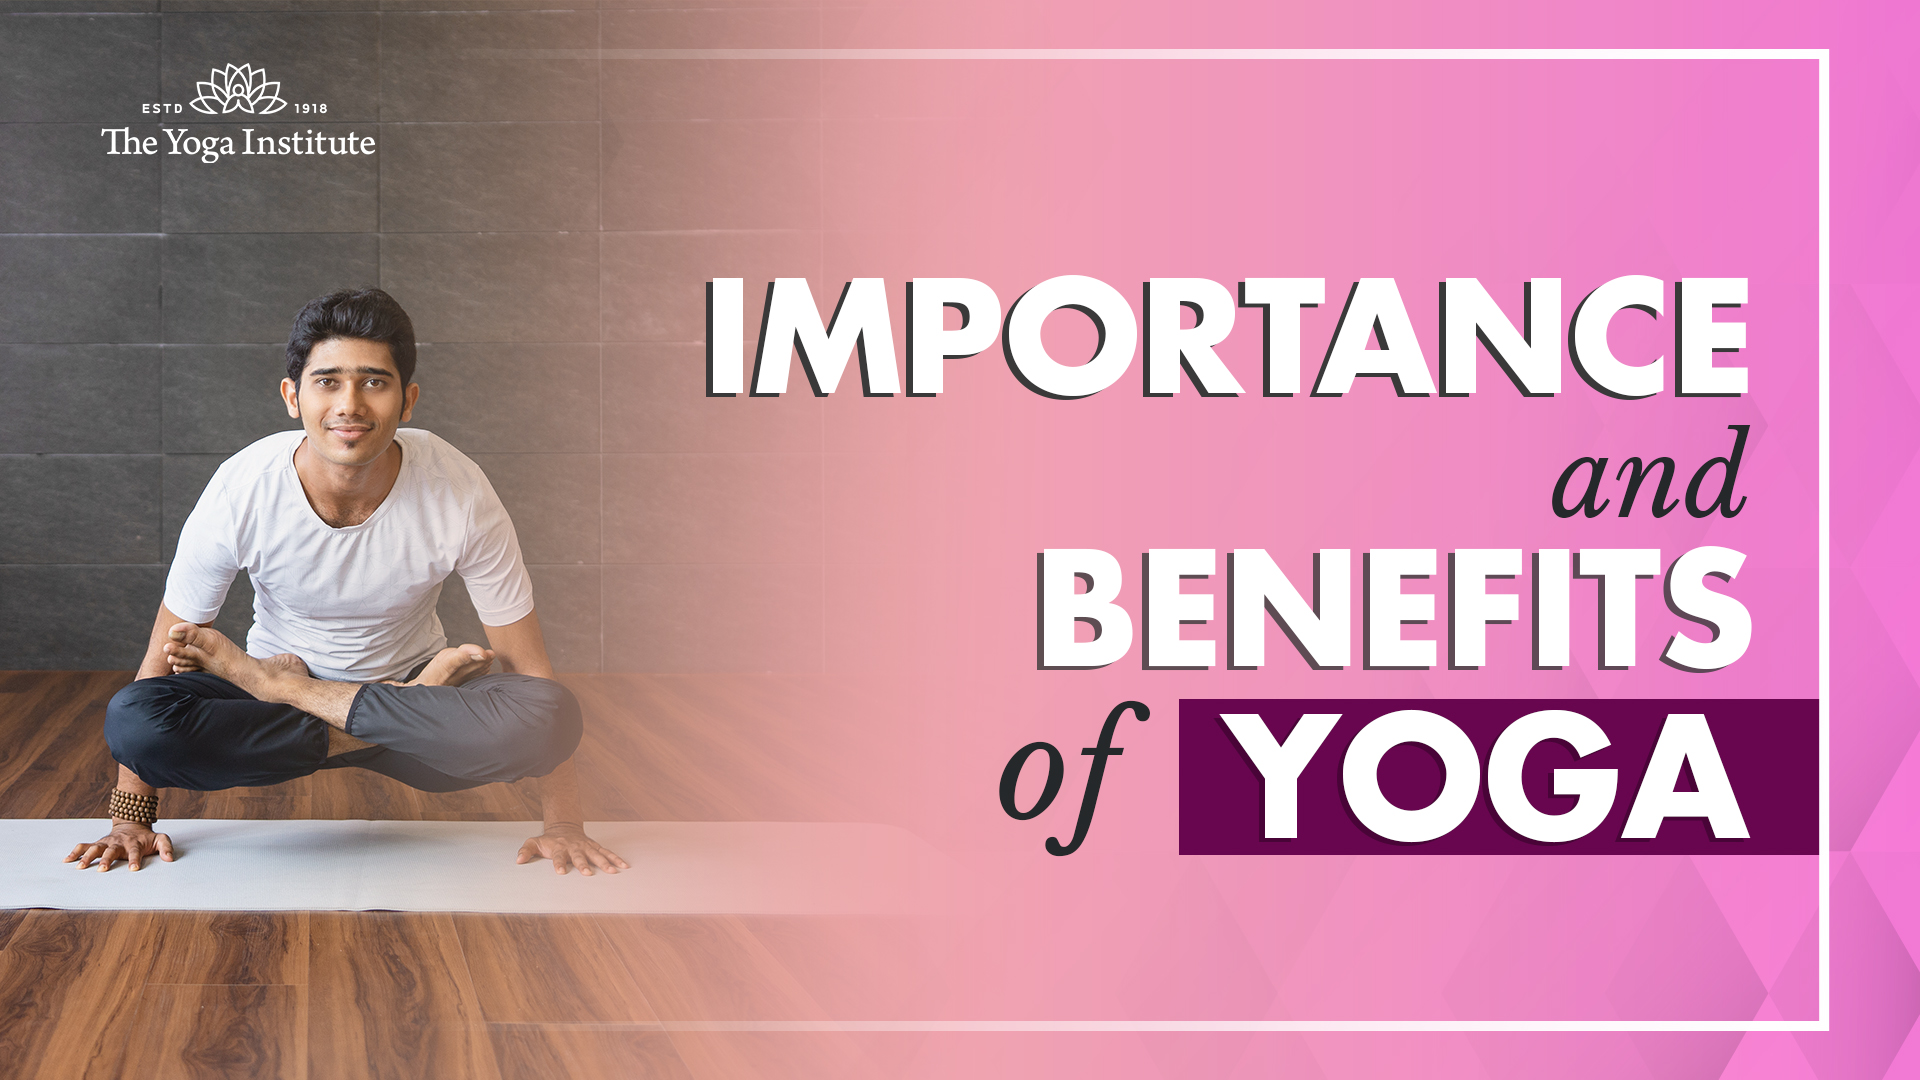 The benefits of practicing yoga for mental health, by Werfit